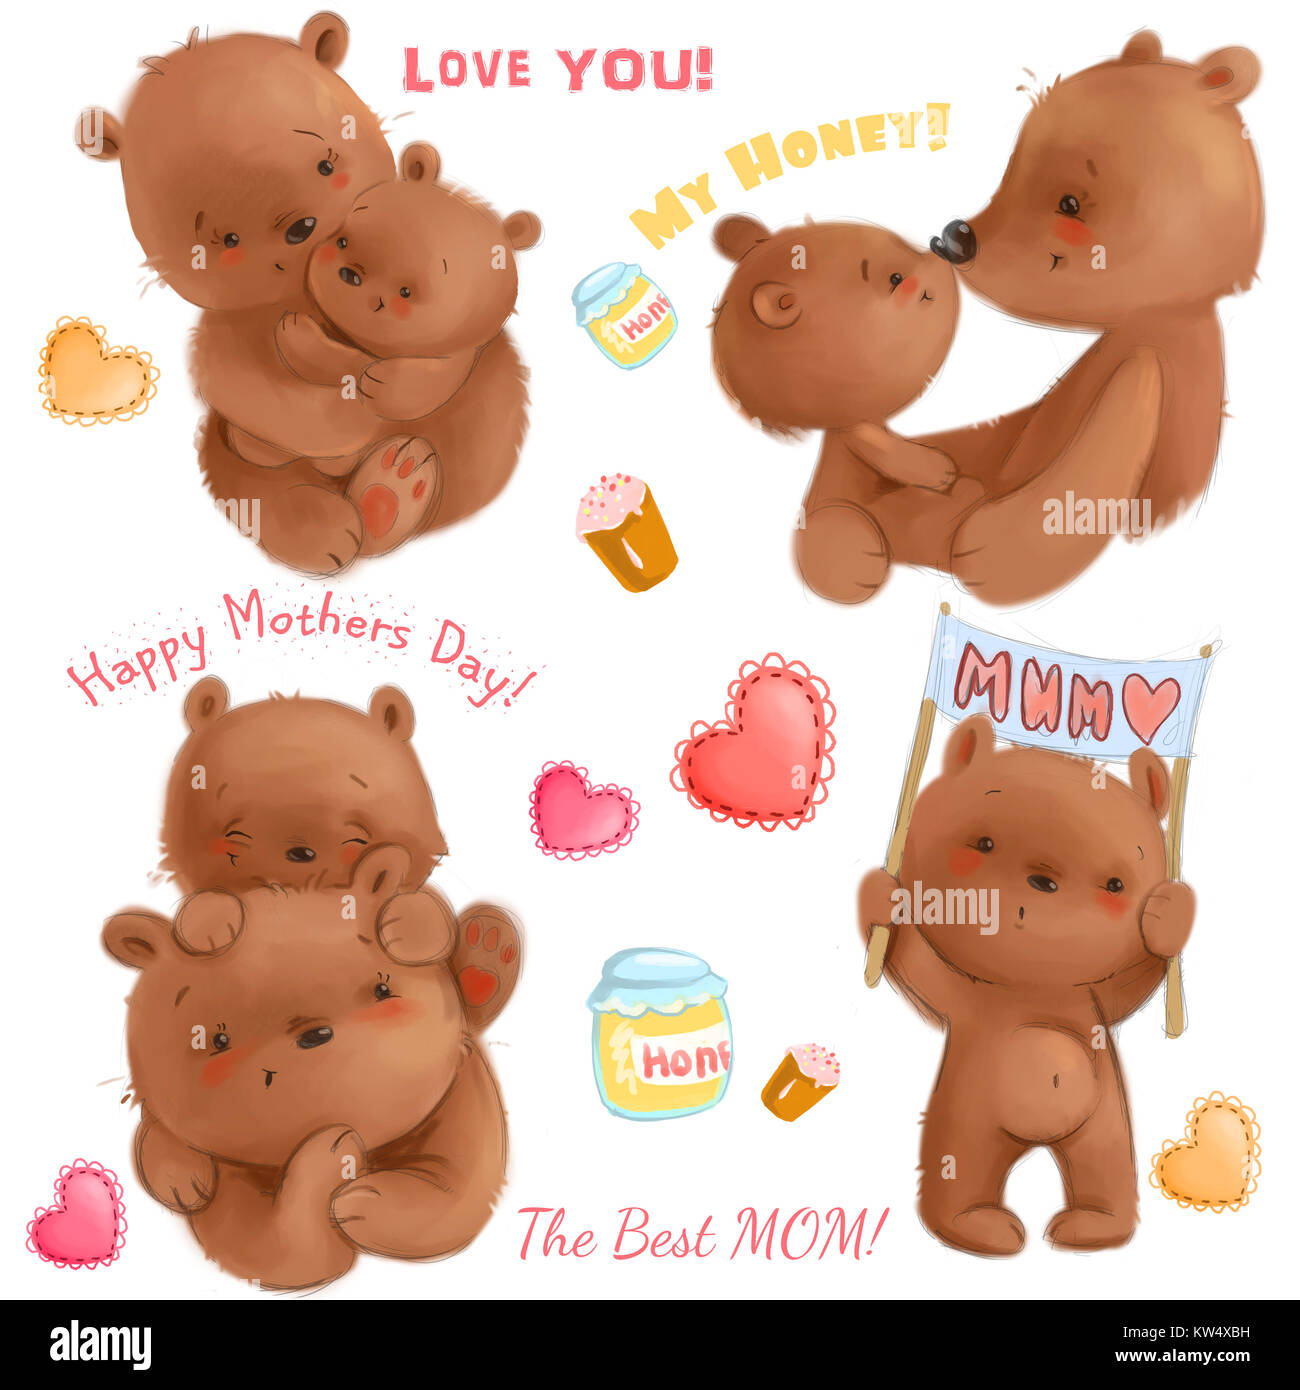 Cute mothers day isolated clipart with funny bears mom and her cubs, hearts, honey, cakes. It's about love. Use for cardmaking, greeting cards, print, textile. Stock Photo